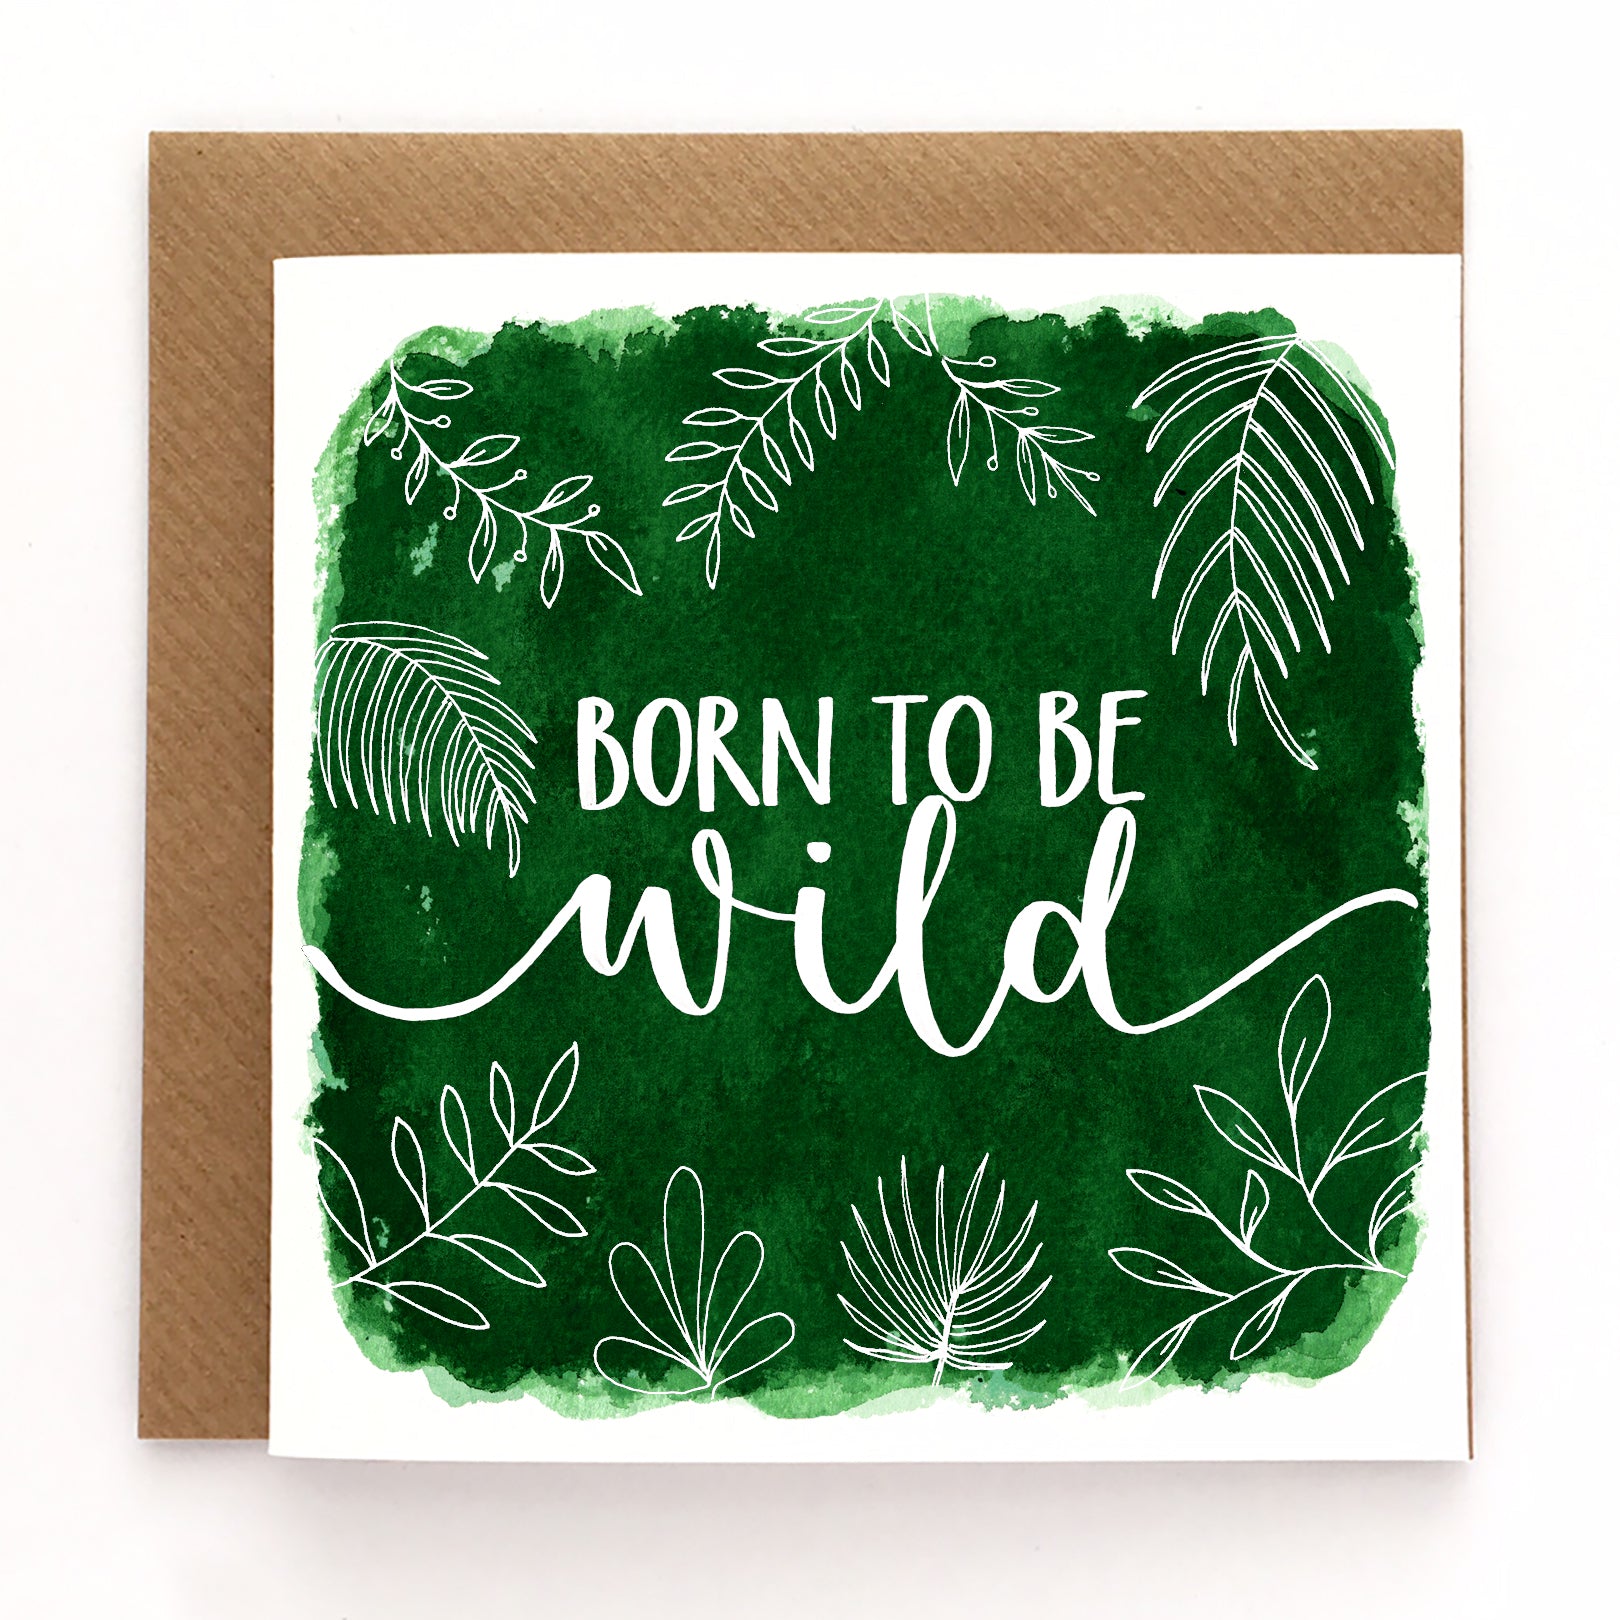 'Born to be wild' greetings card